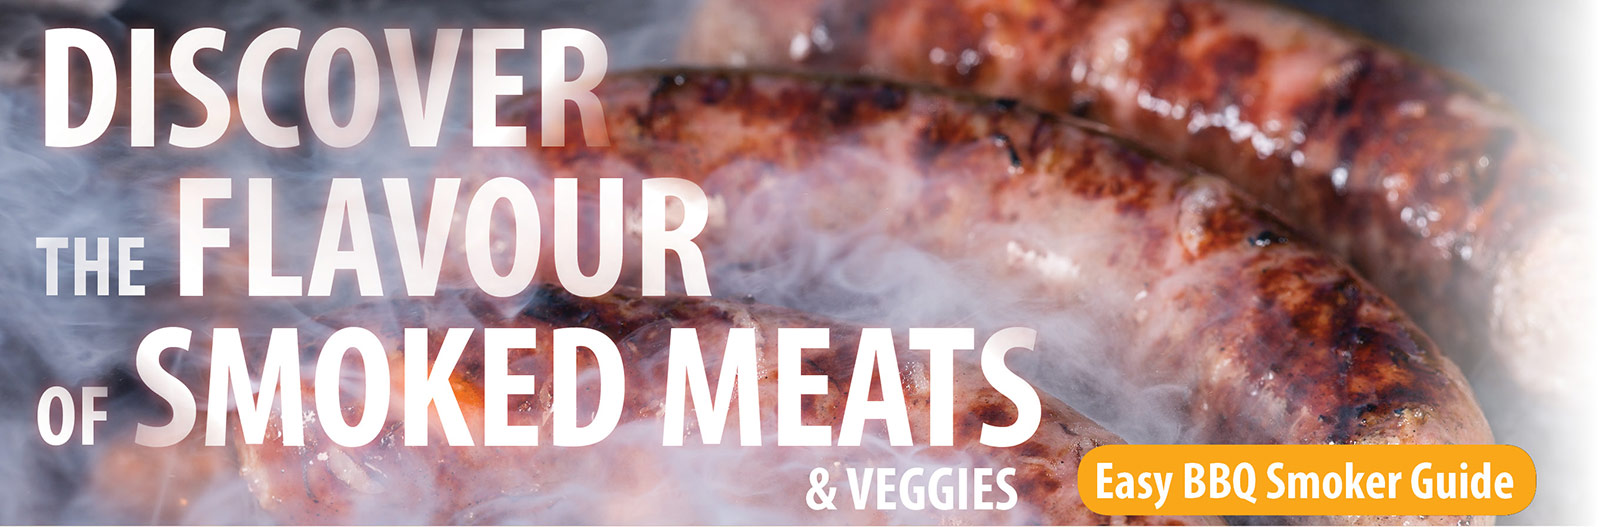 Discover the Flavour of Smoked Meats